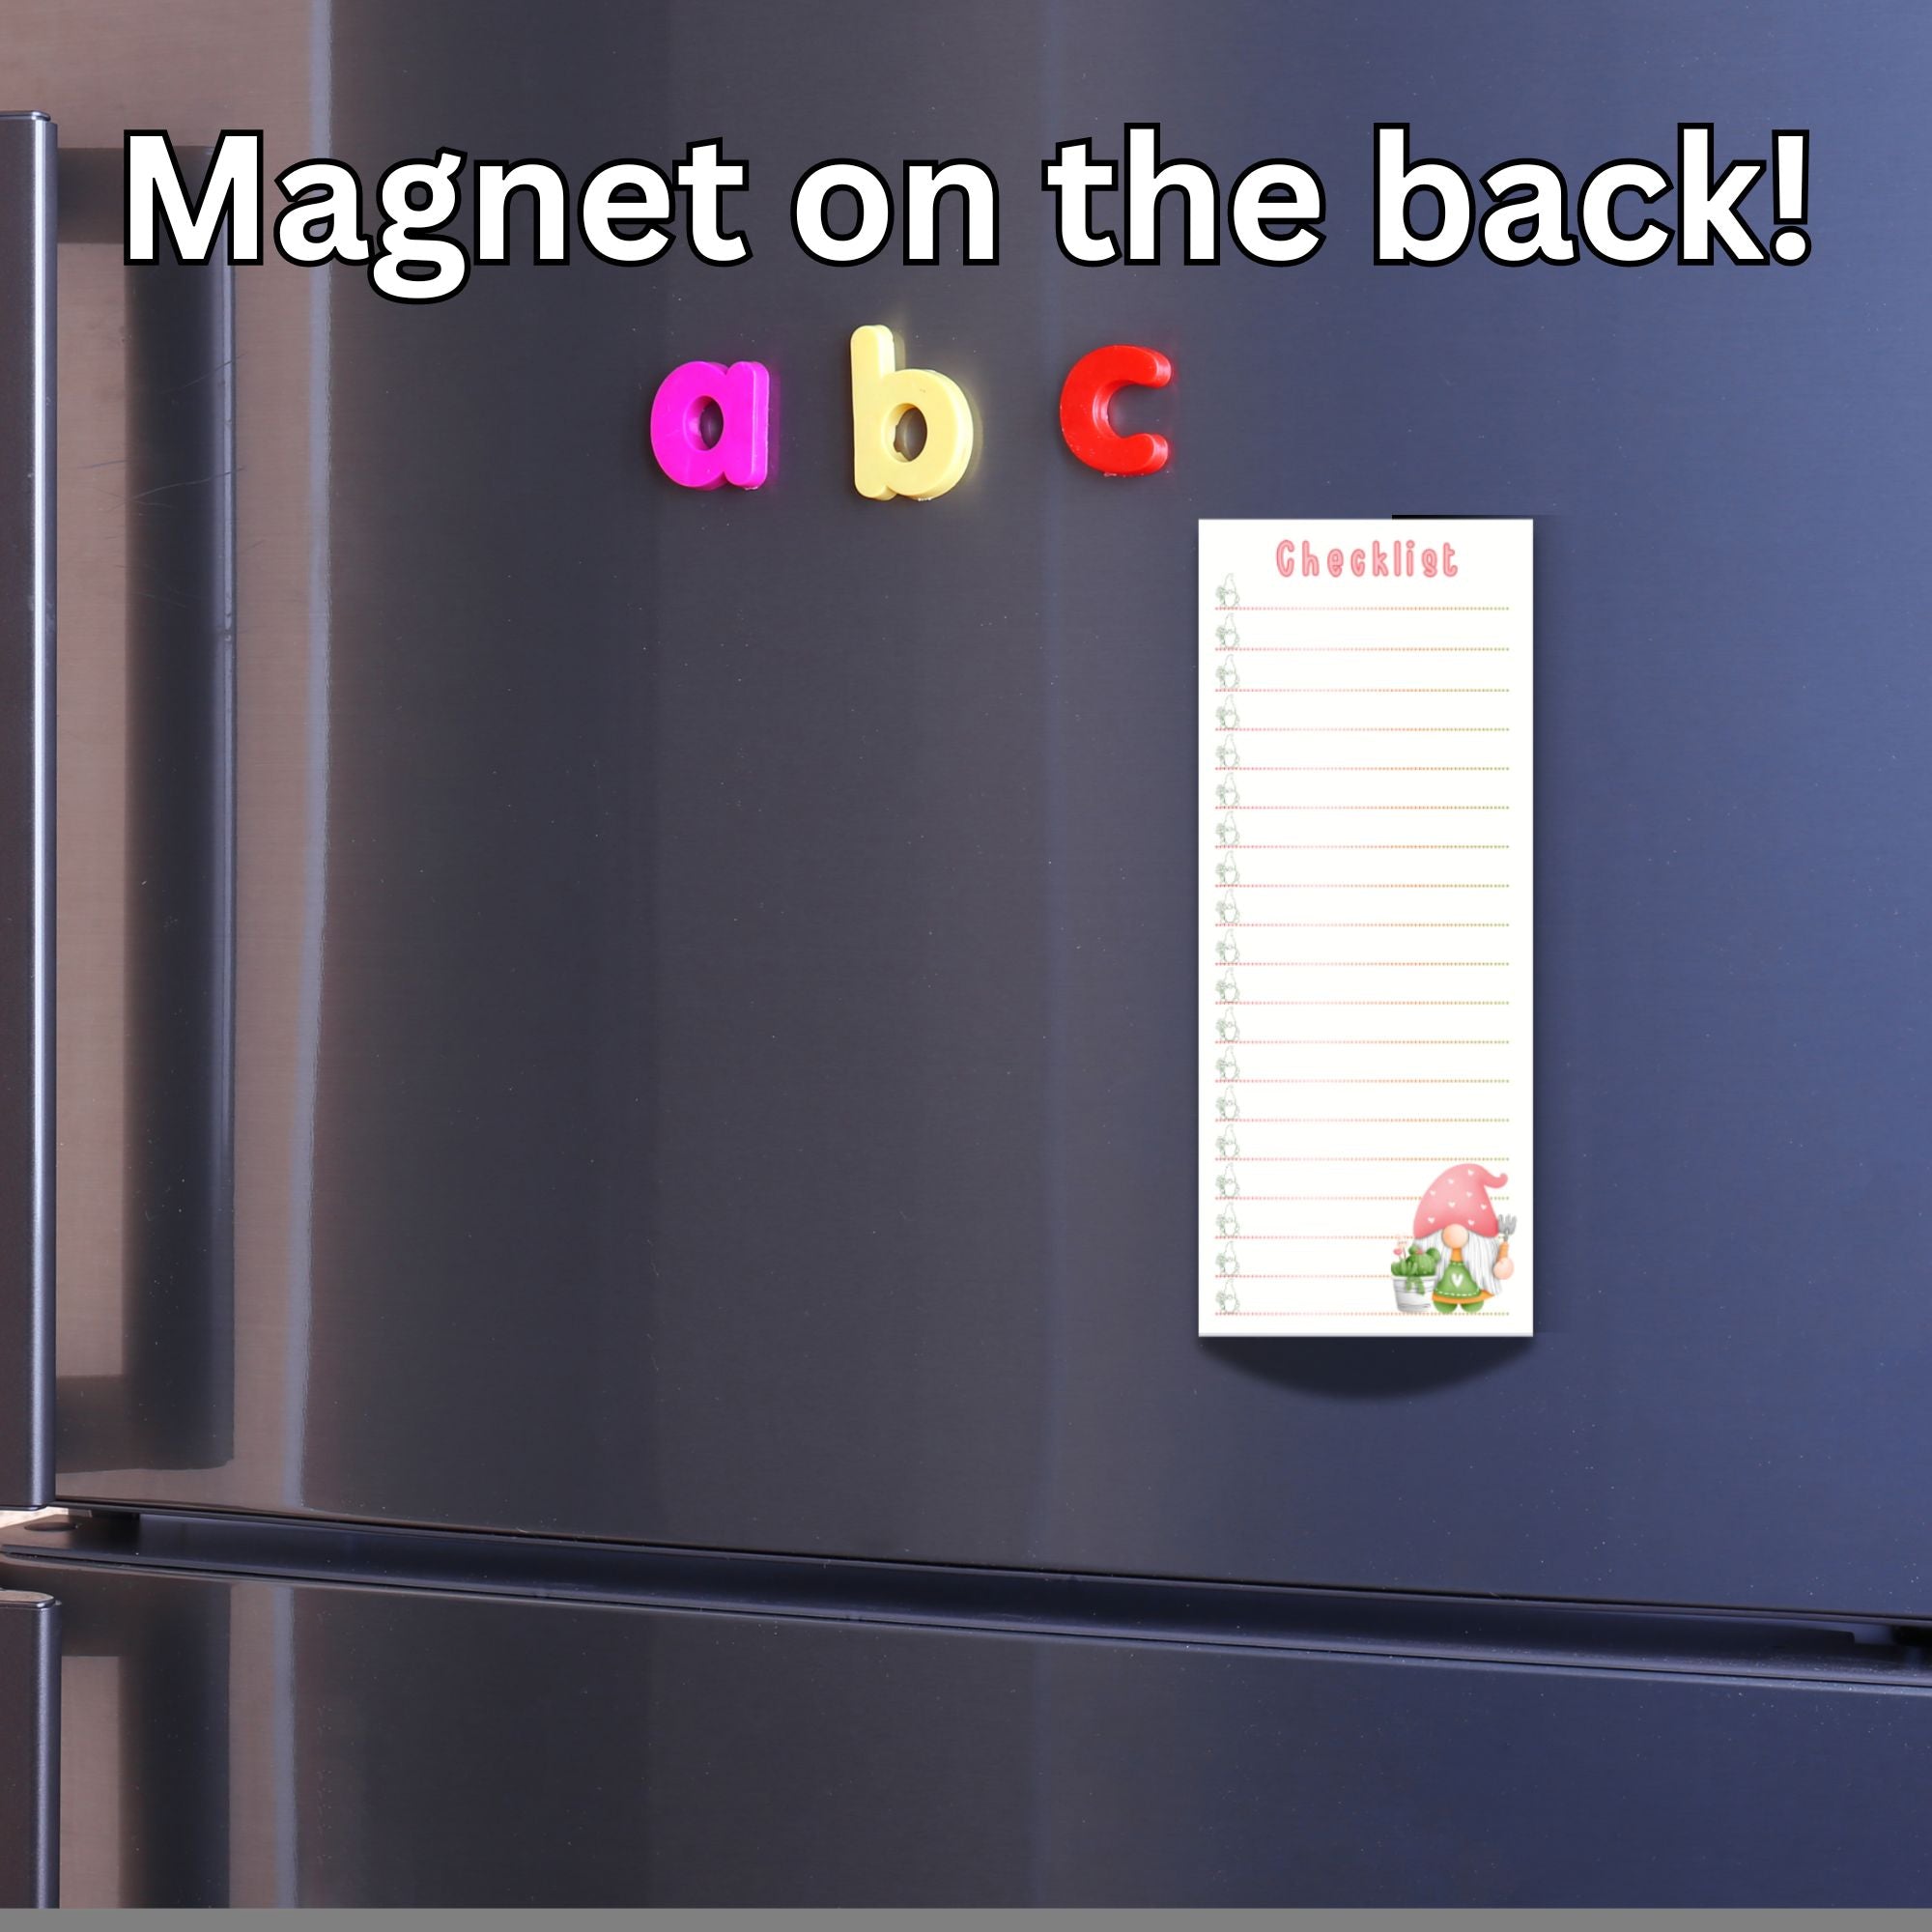 This image shows the Checklist Notepad - Gnomes on the front of a refrigerator. 